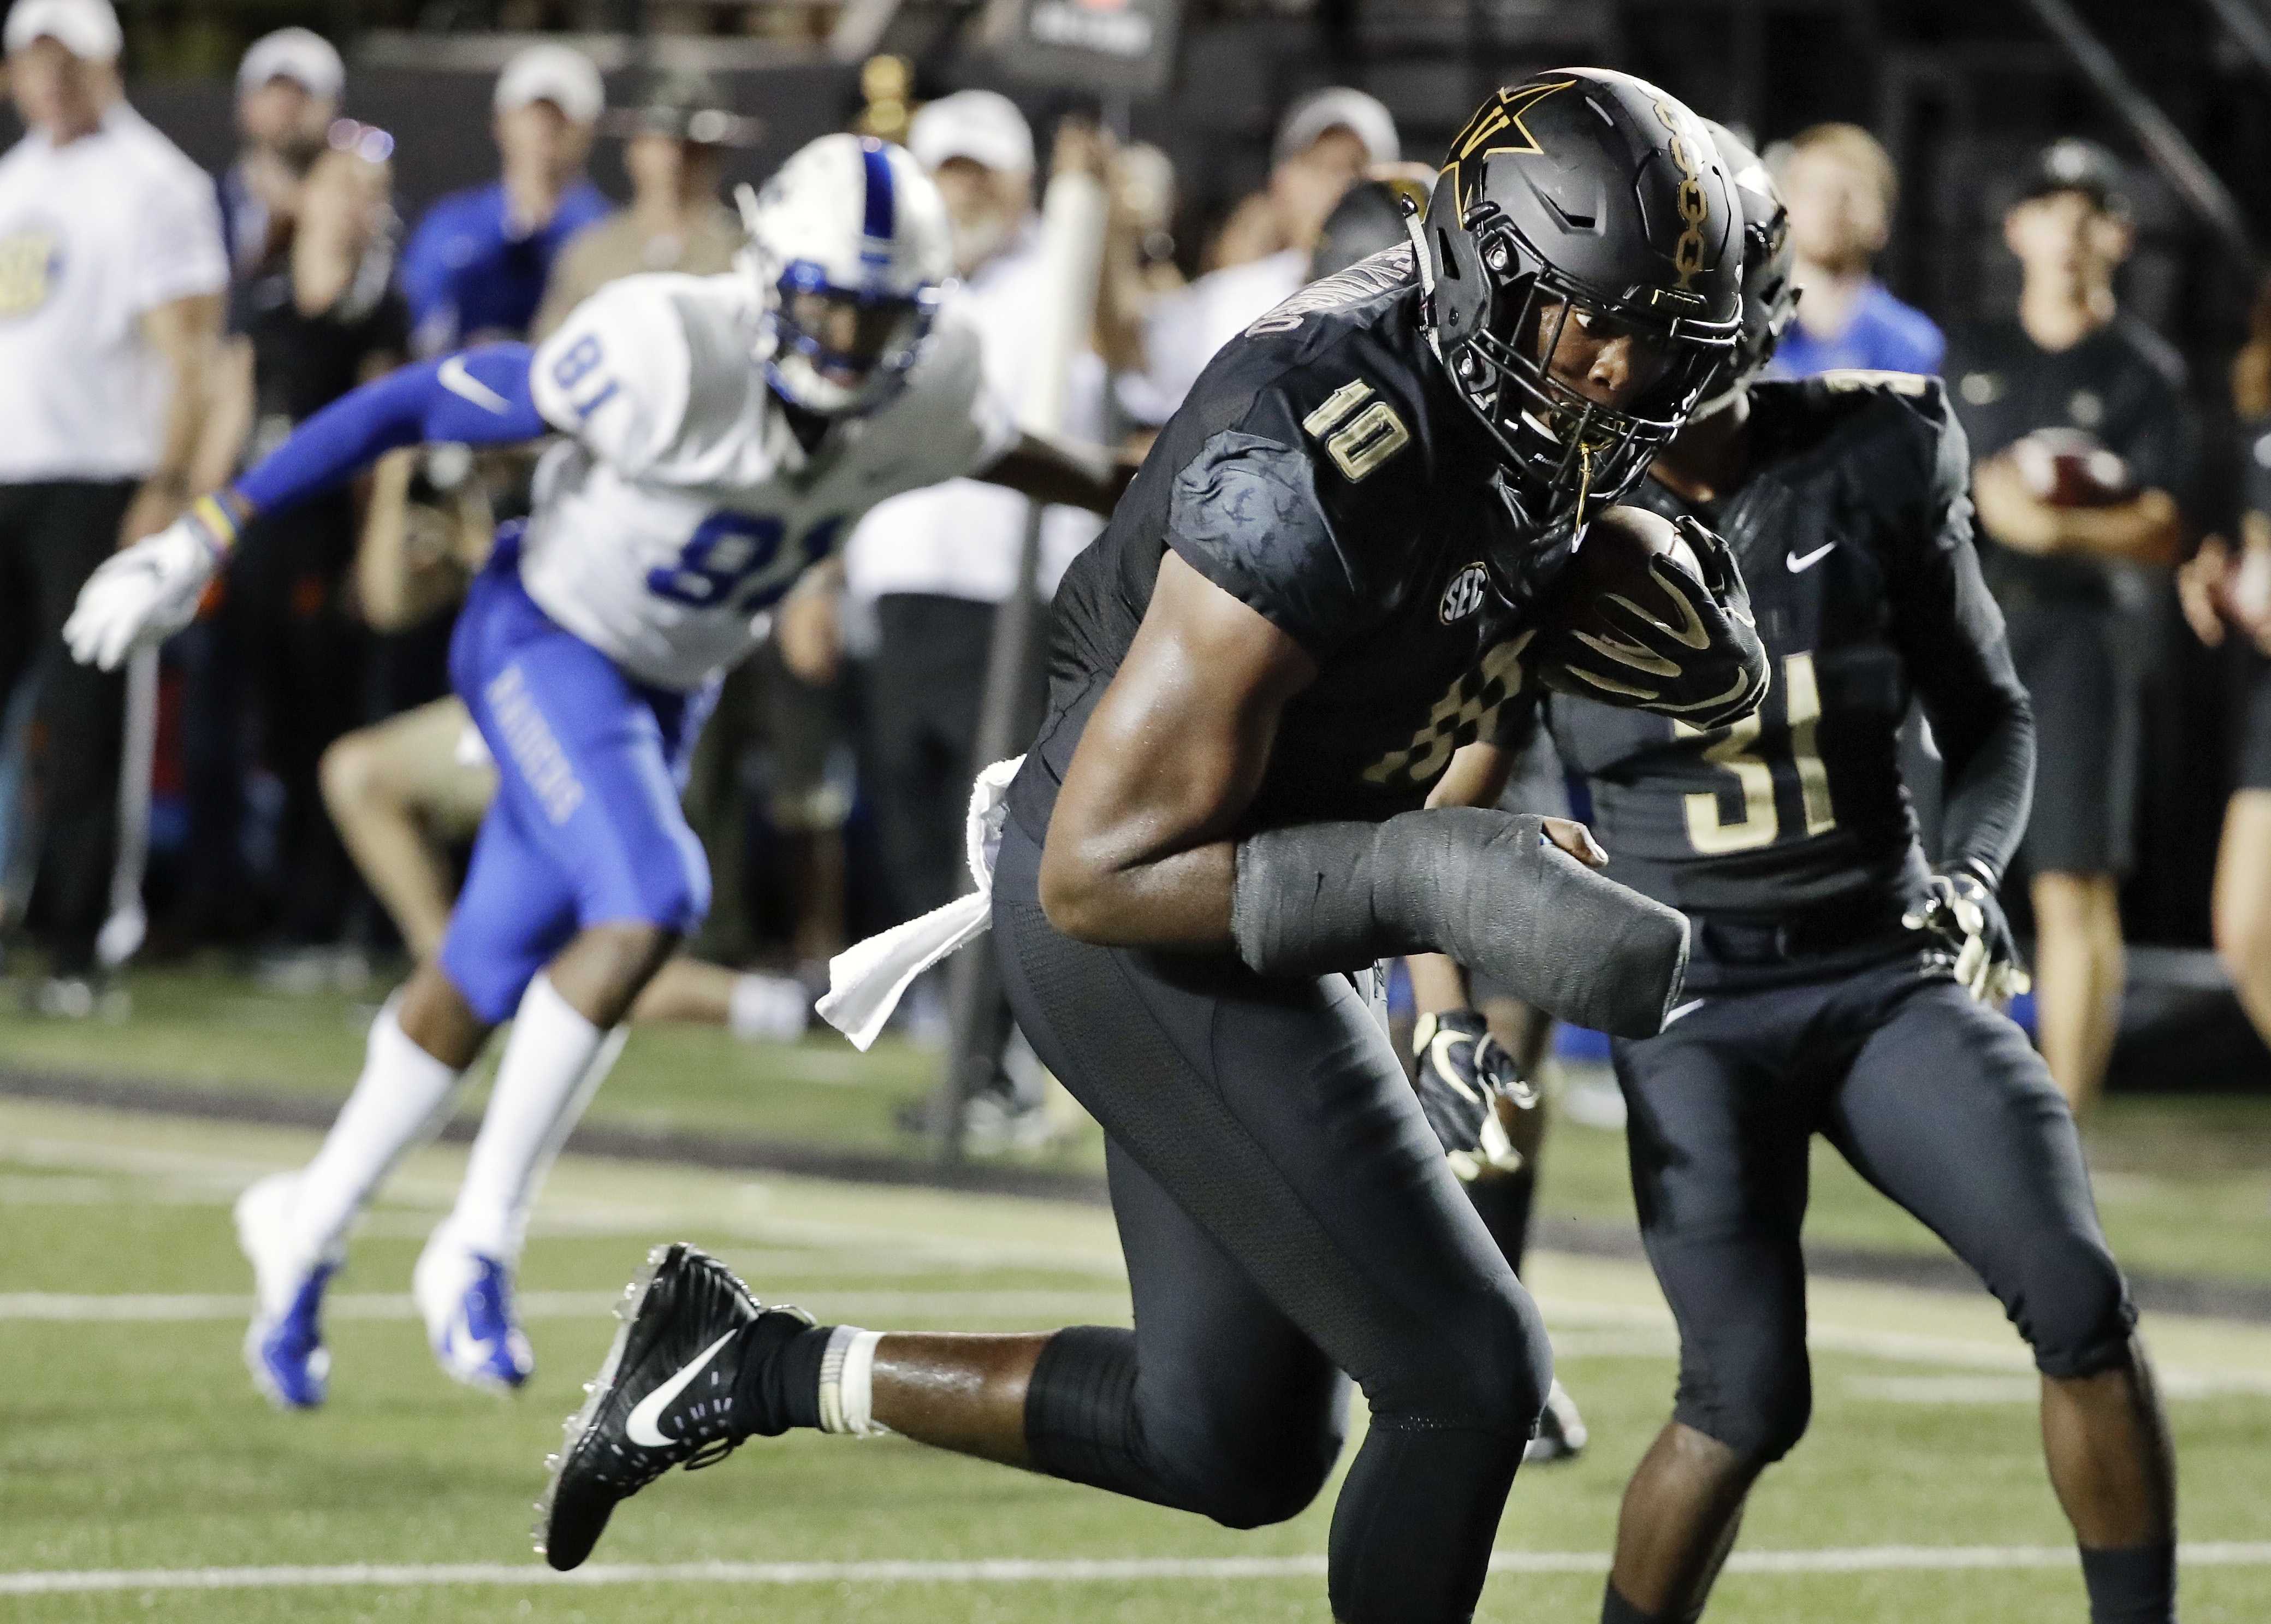 Vanderbilt opens beating area rival Middle Tennessee 35-7